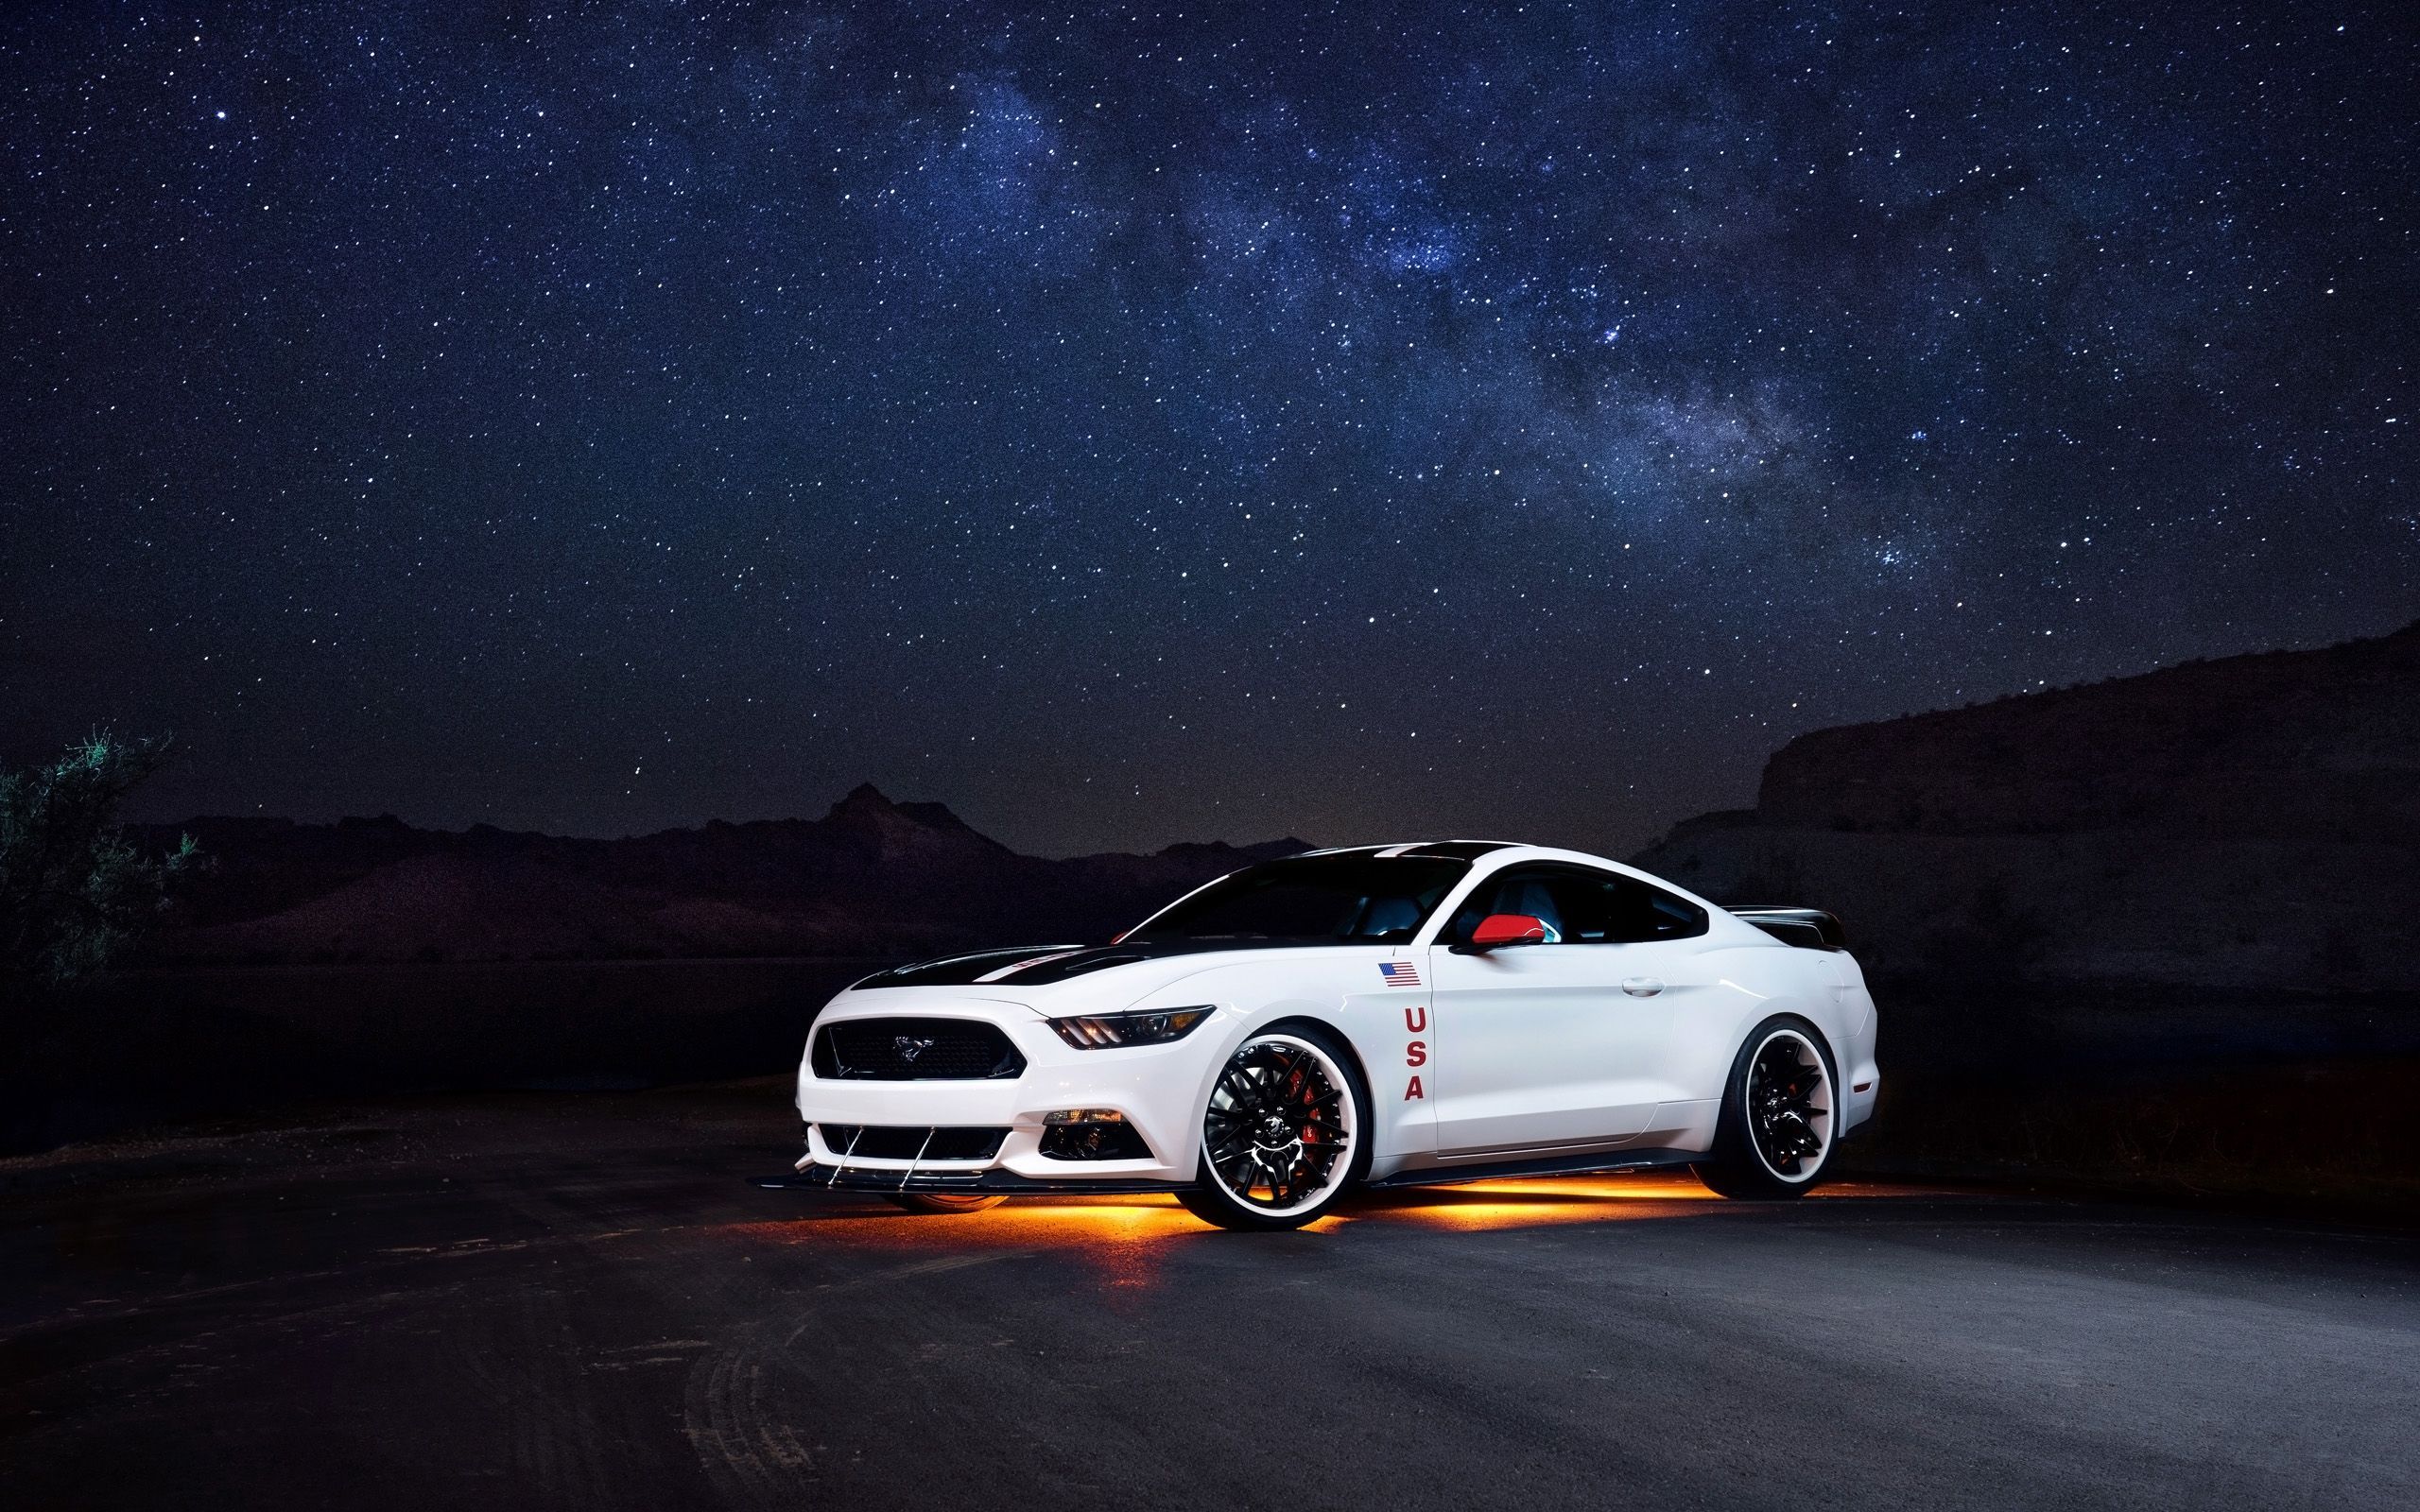 2015 Ford Mustang GT Apollo Edition 2 Wallpaper | HD Car Wallpapers